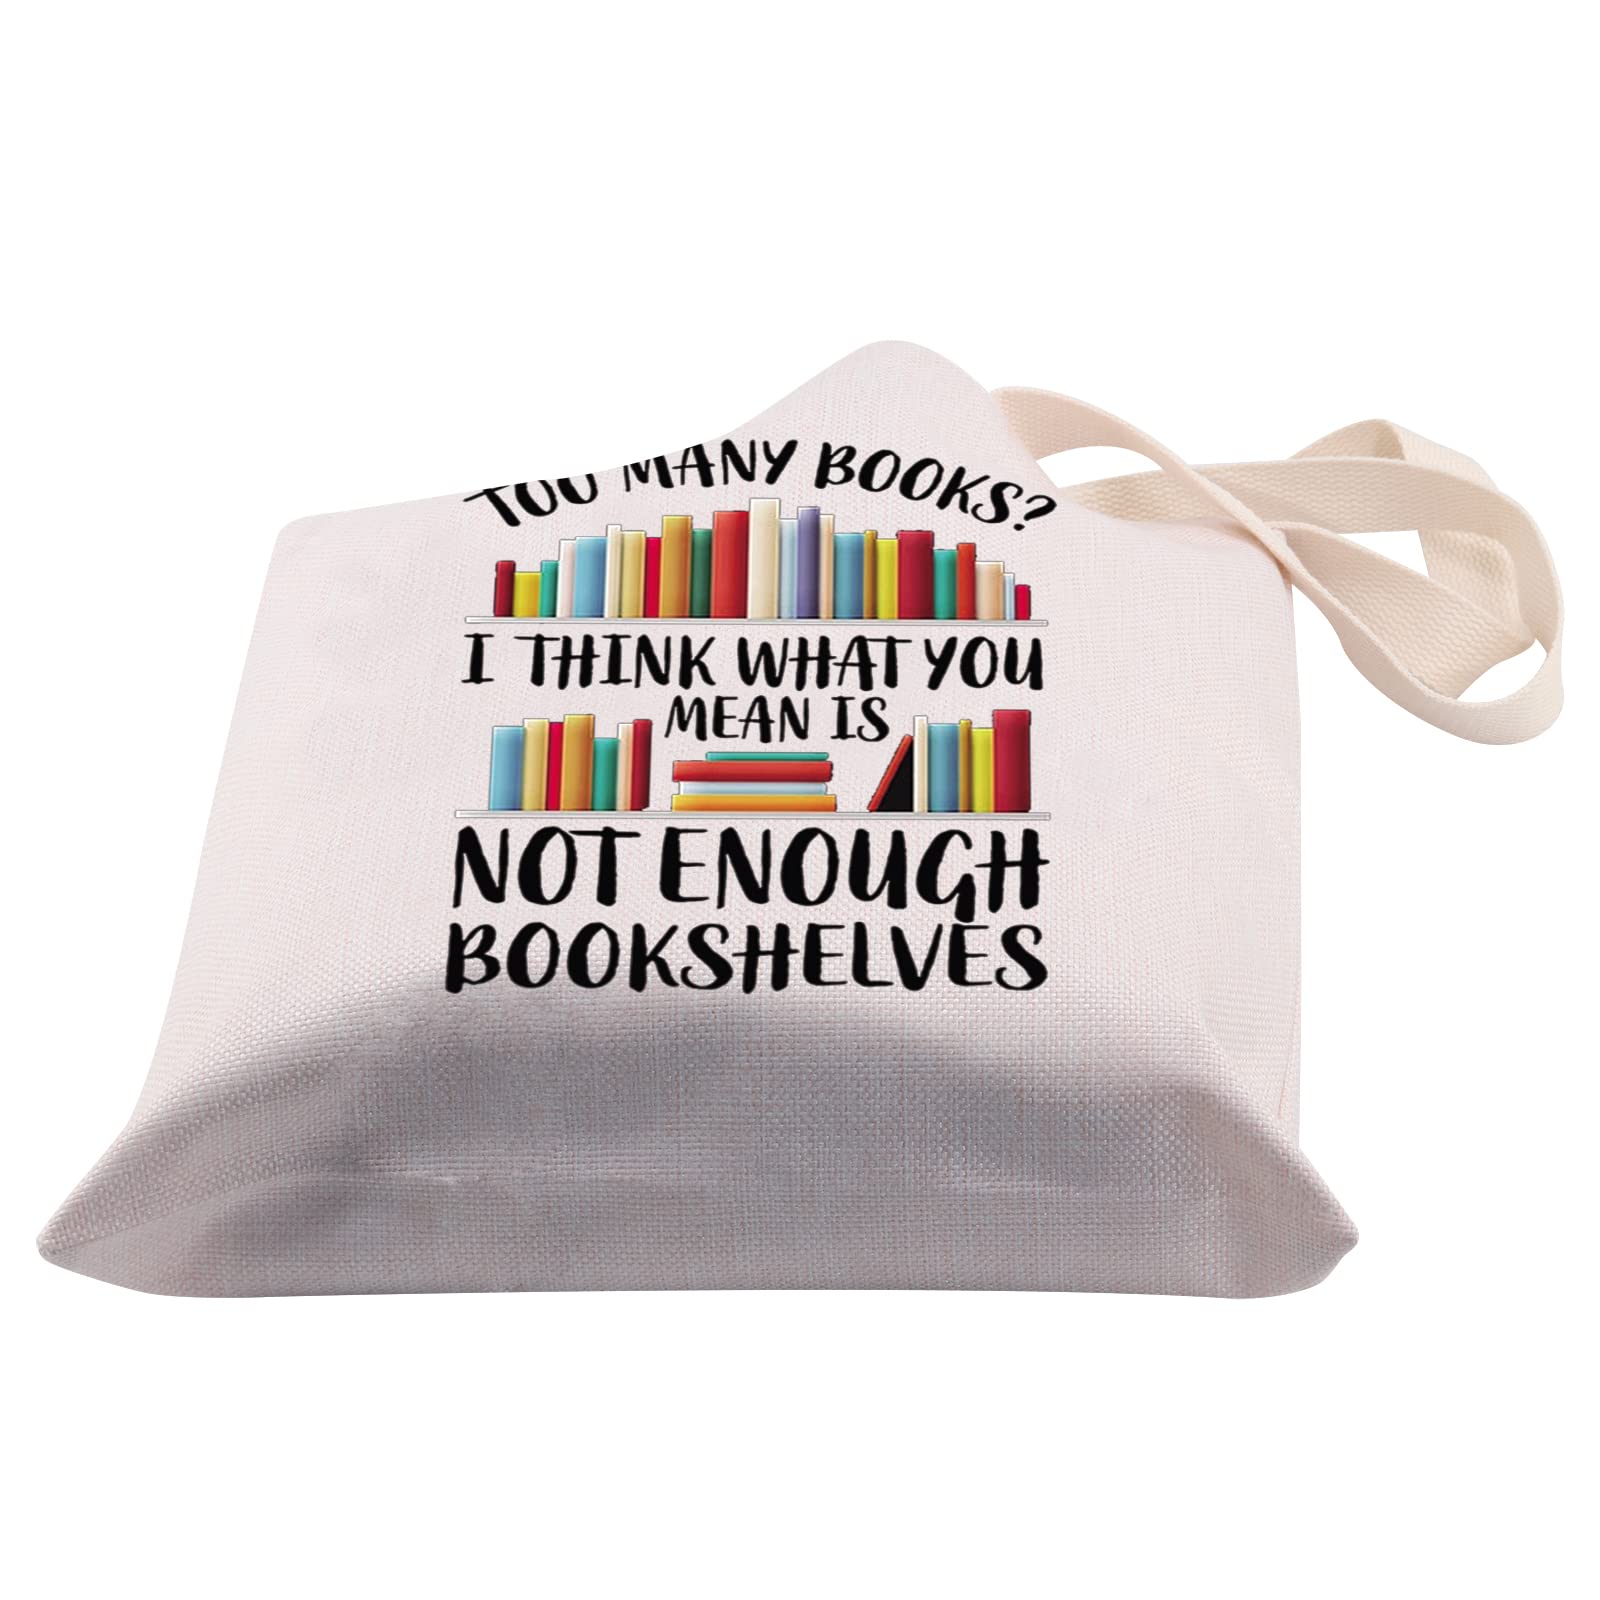 BDPWSS Book Lover Tote Bag For Women Bookworm Librarian Gift Book Club Reading Lover Reusable Shoulder Bag Funny Library Gift (Too many books TG)